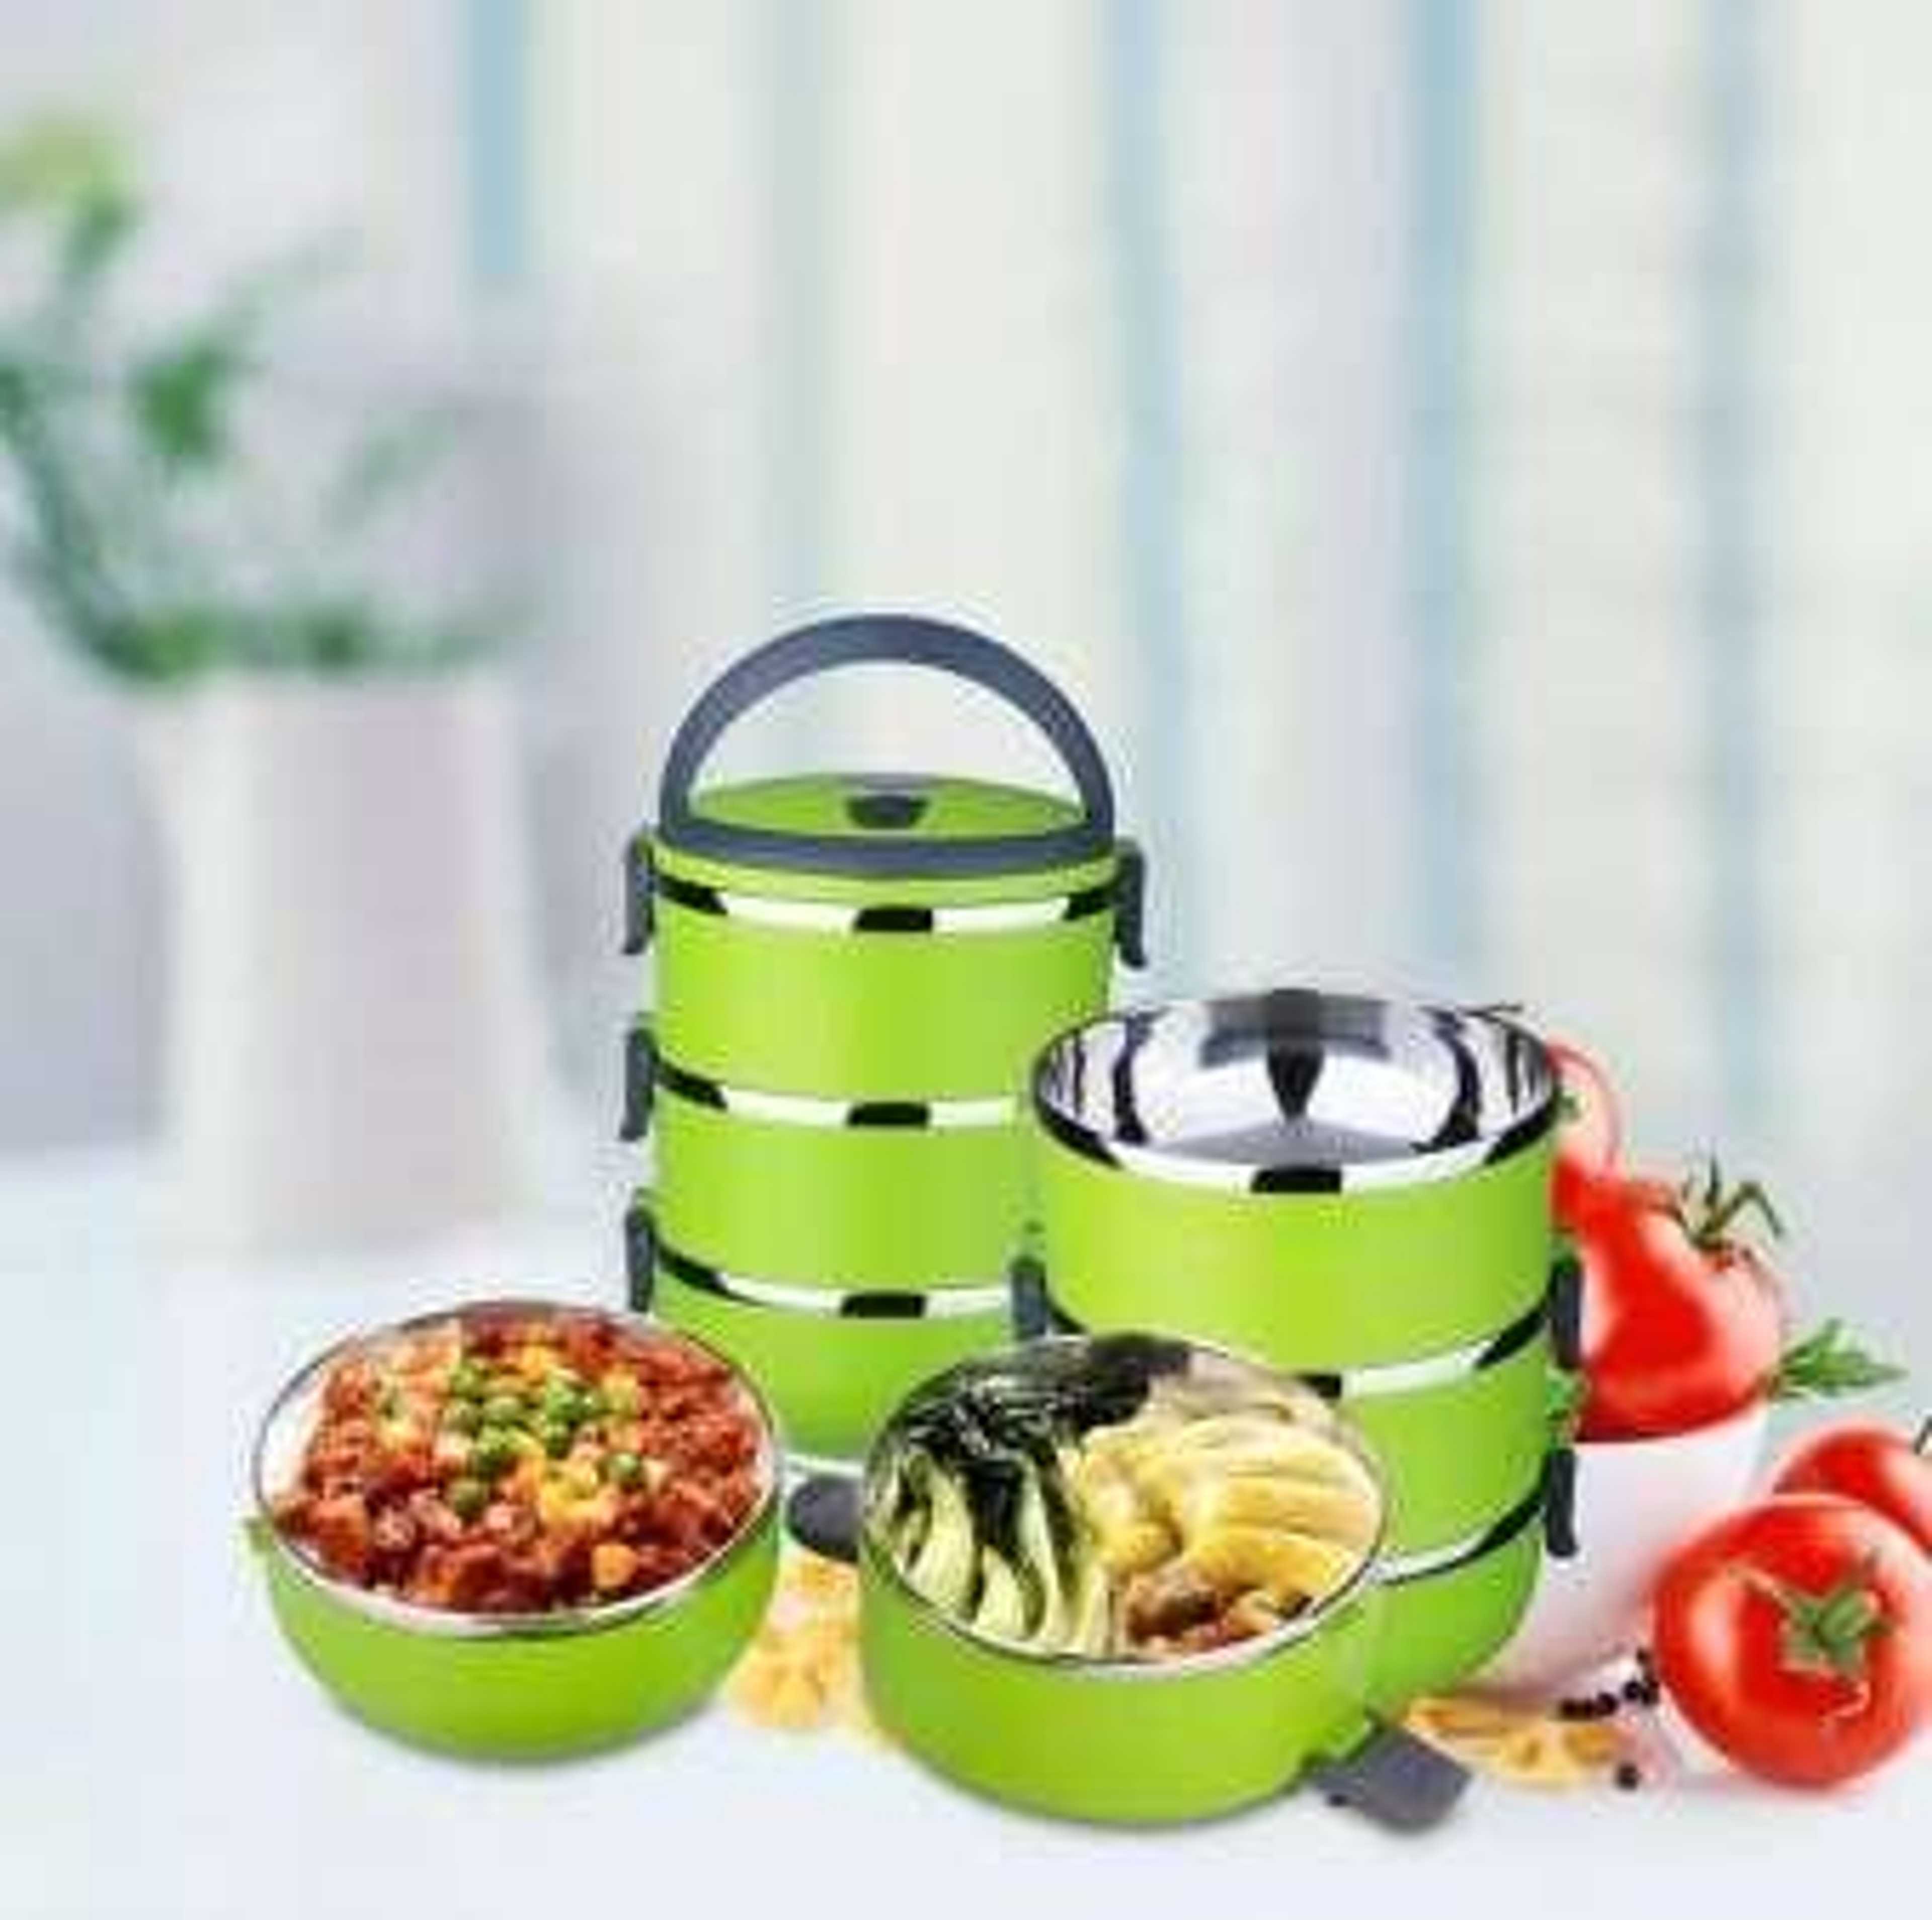 3 Layer Lunch Box Food Carrier Stainless Steel Bowls Keeps Food Hot